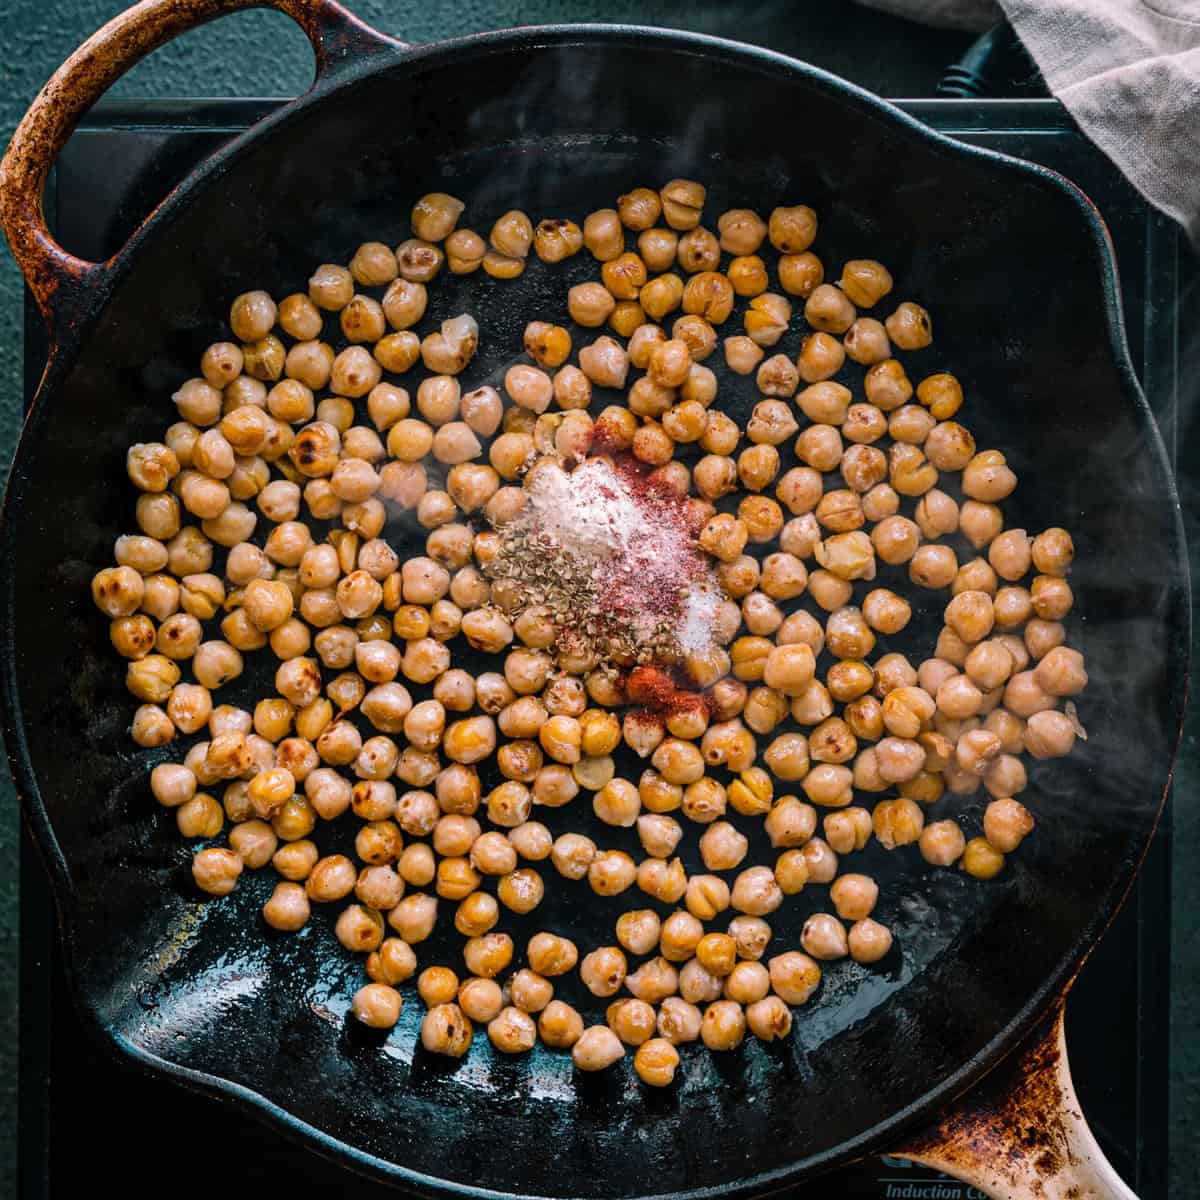 pan-frying chickpeas with spices and salt in a saute pan